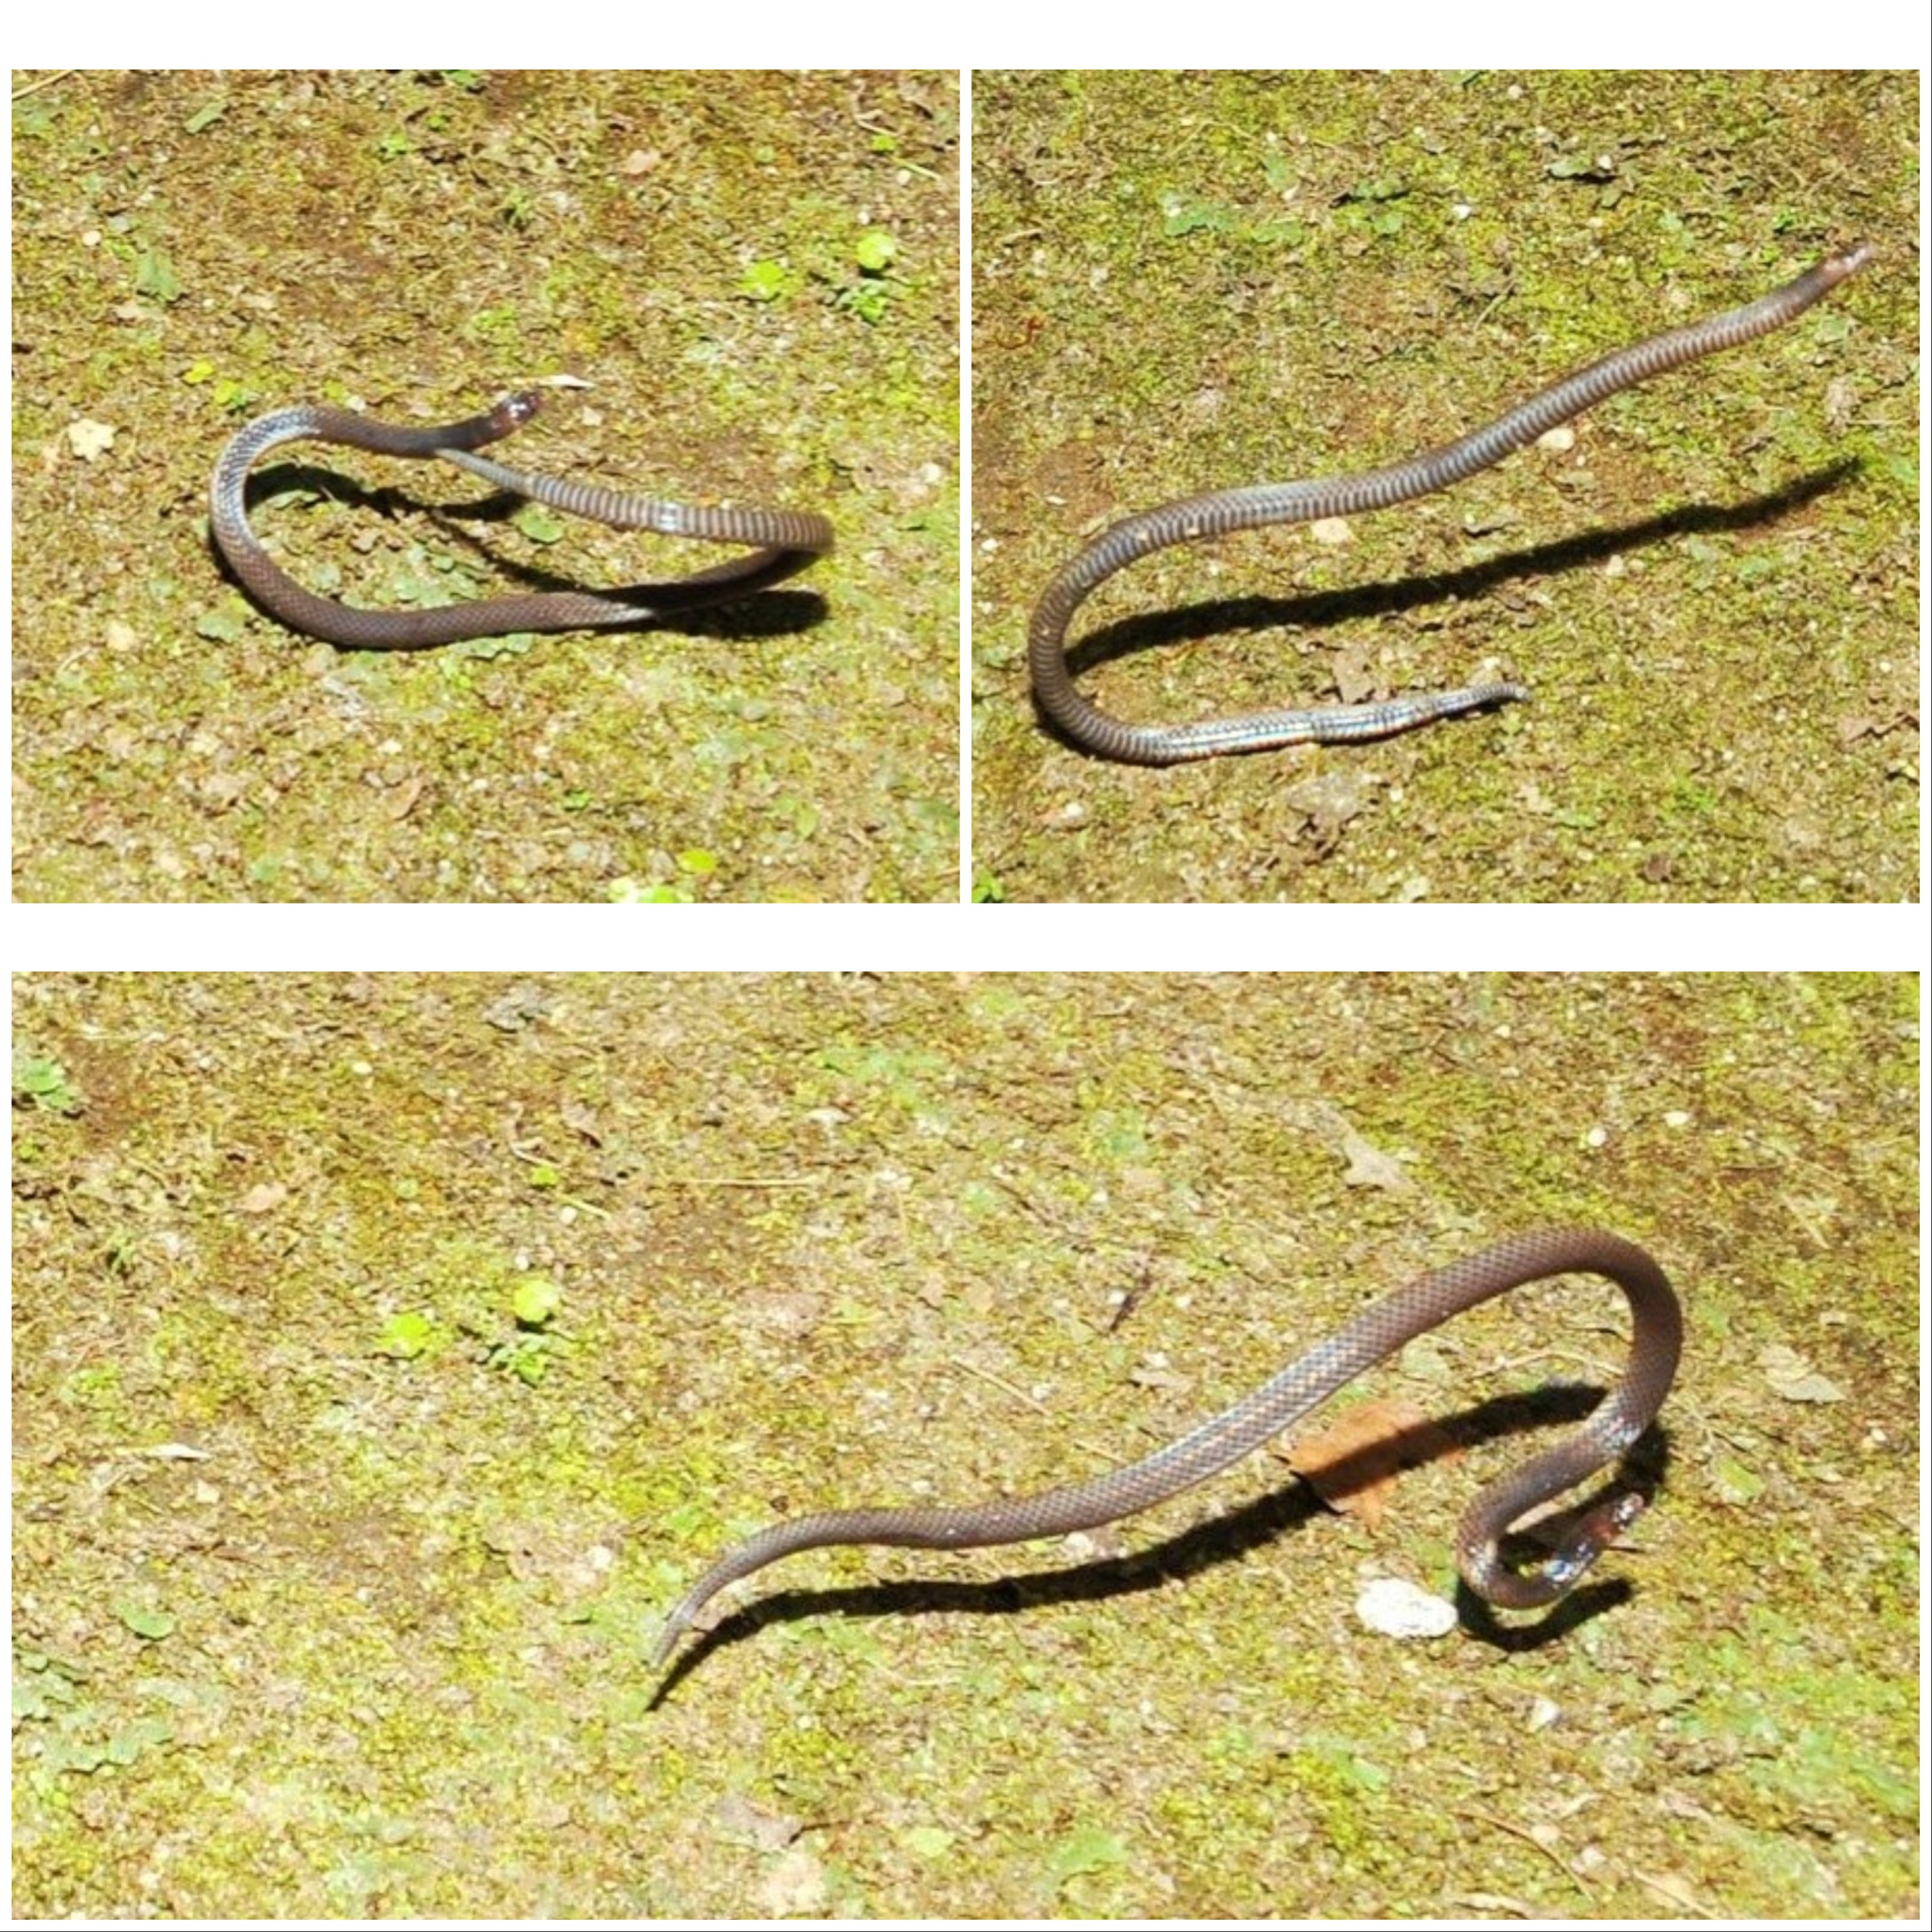 The dwarf reef snake captured on camera rolling away, in clockwise order from top left. (Image: Evan Quah)